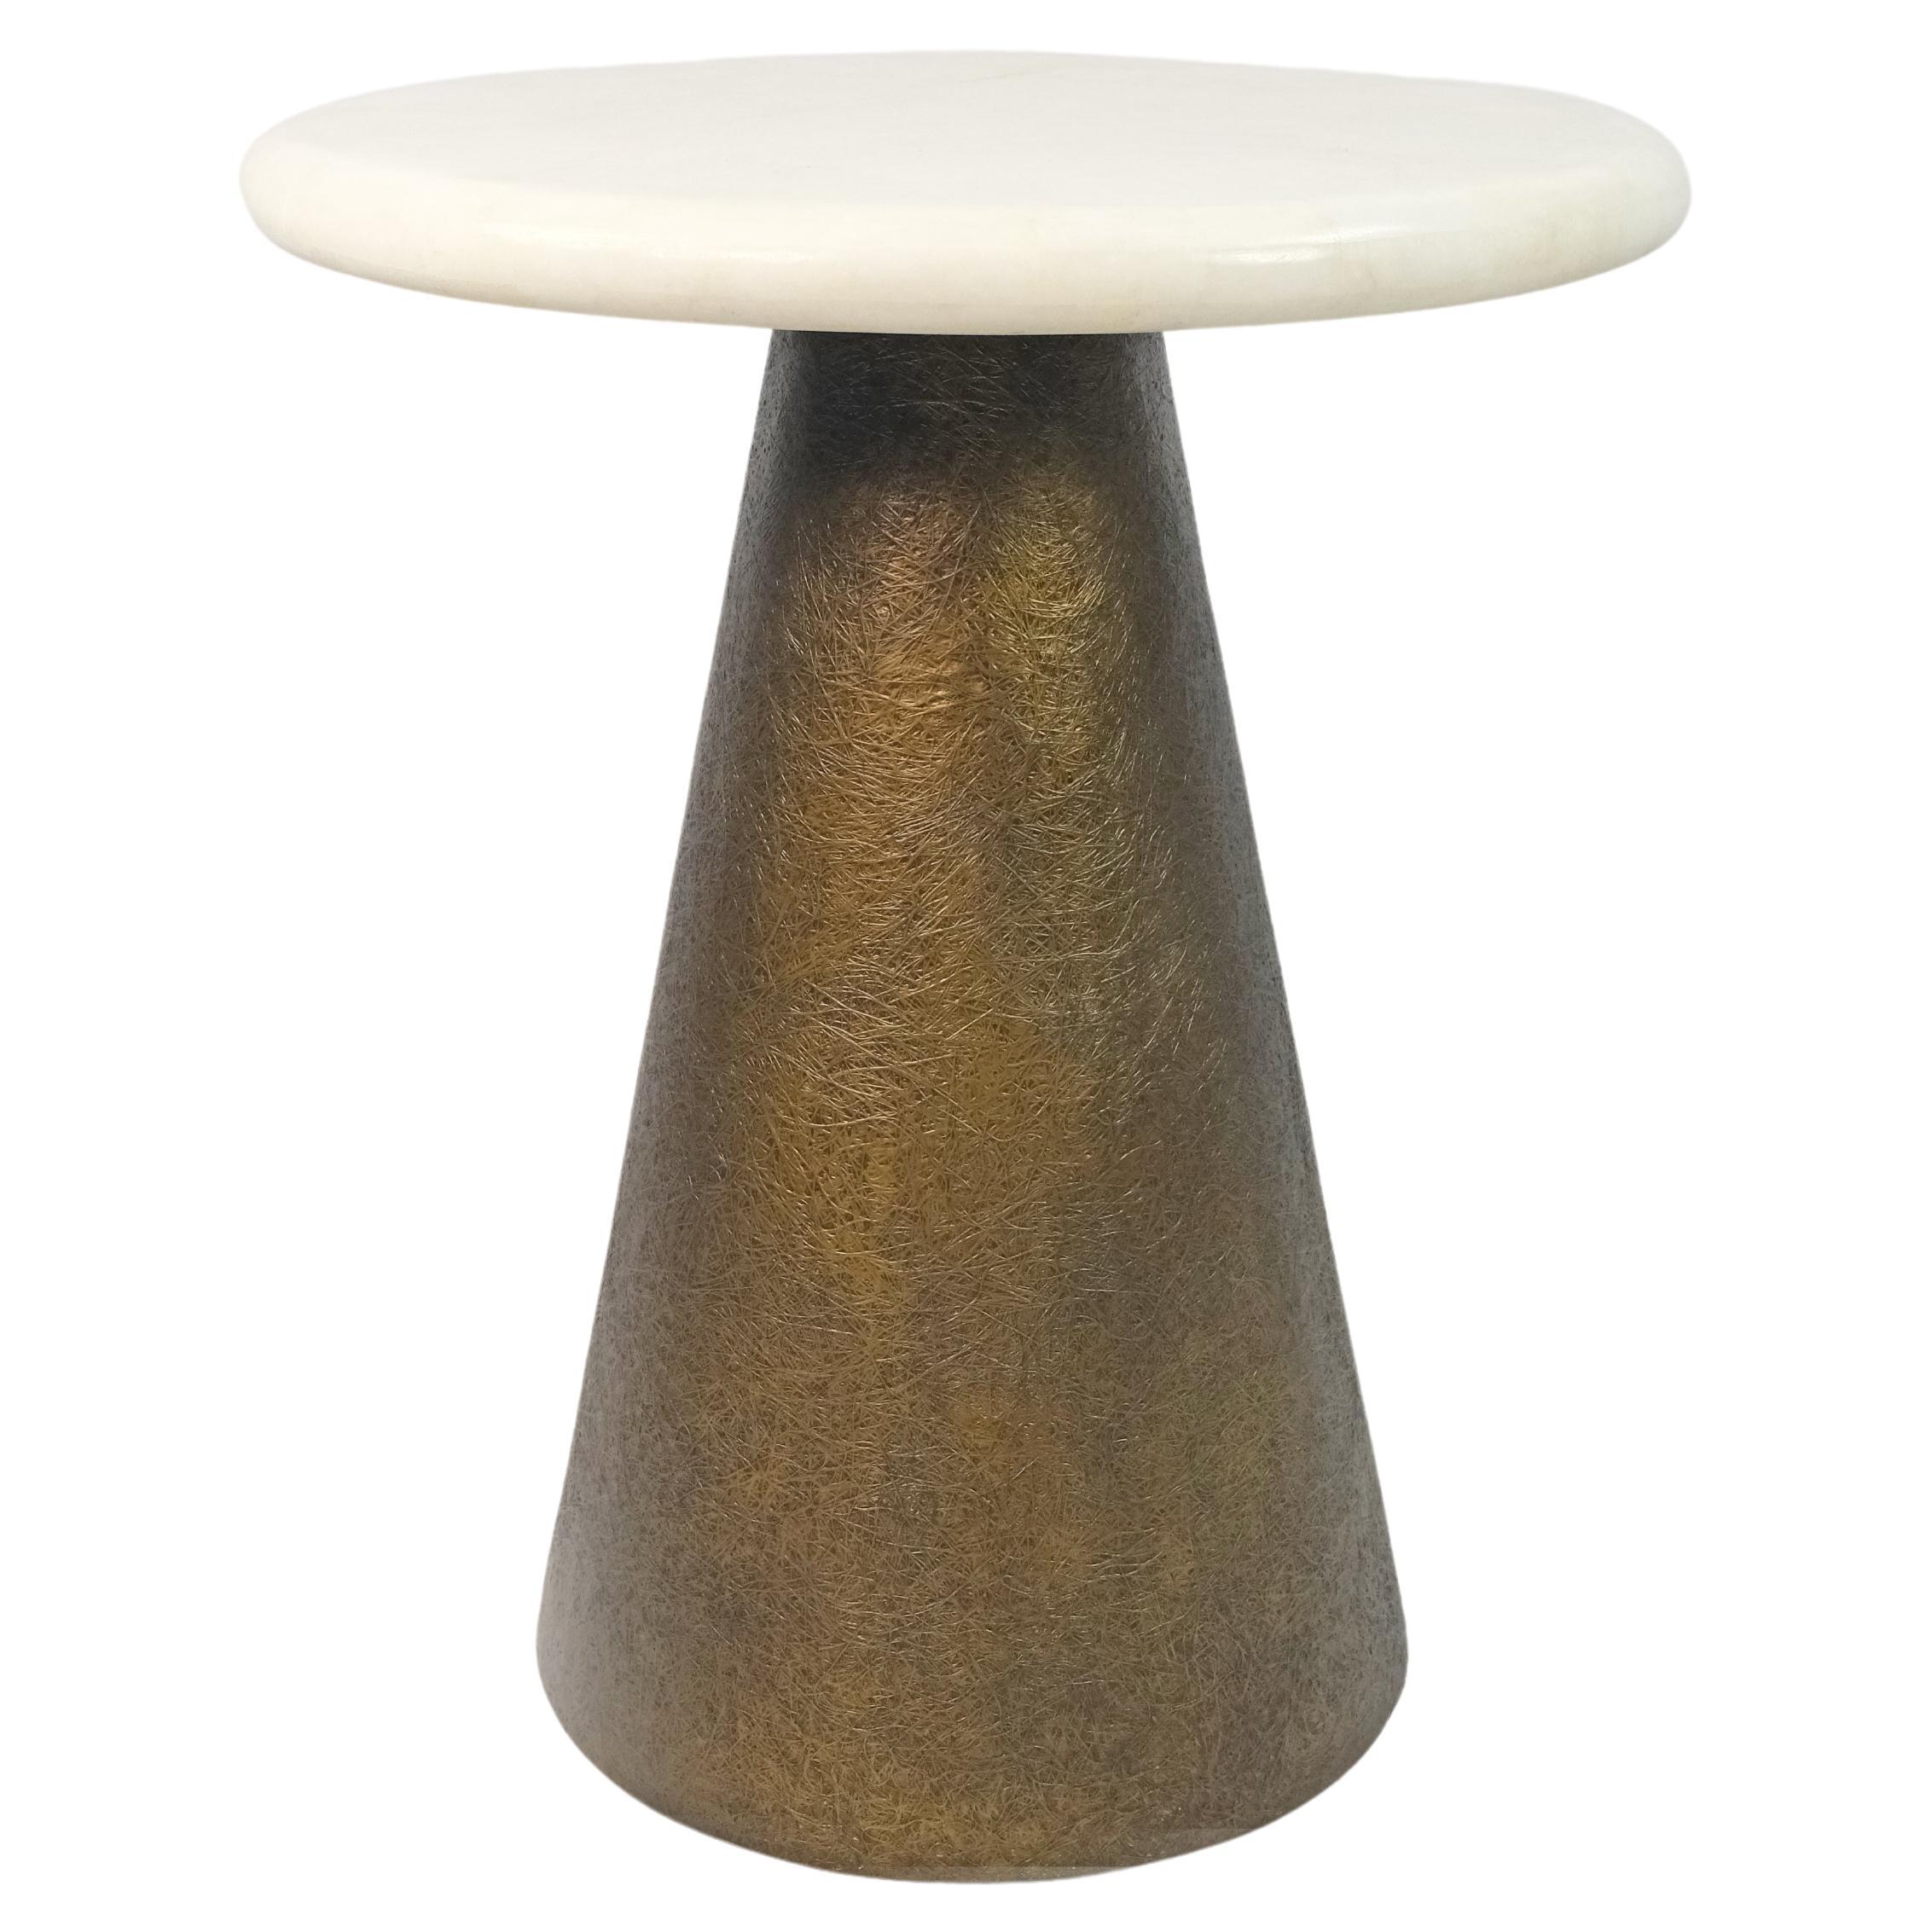 Side Table in White Rock Crystal with a bronzed Base